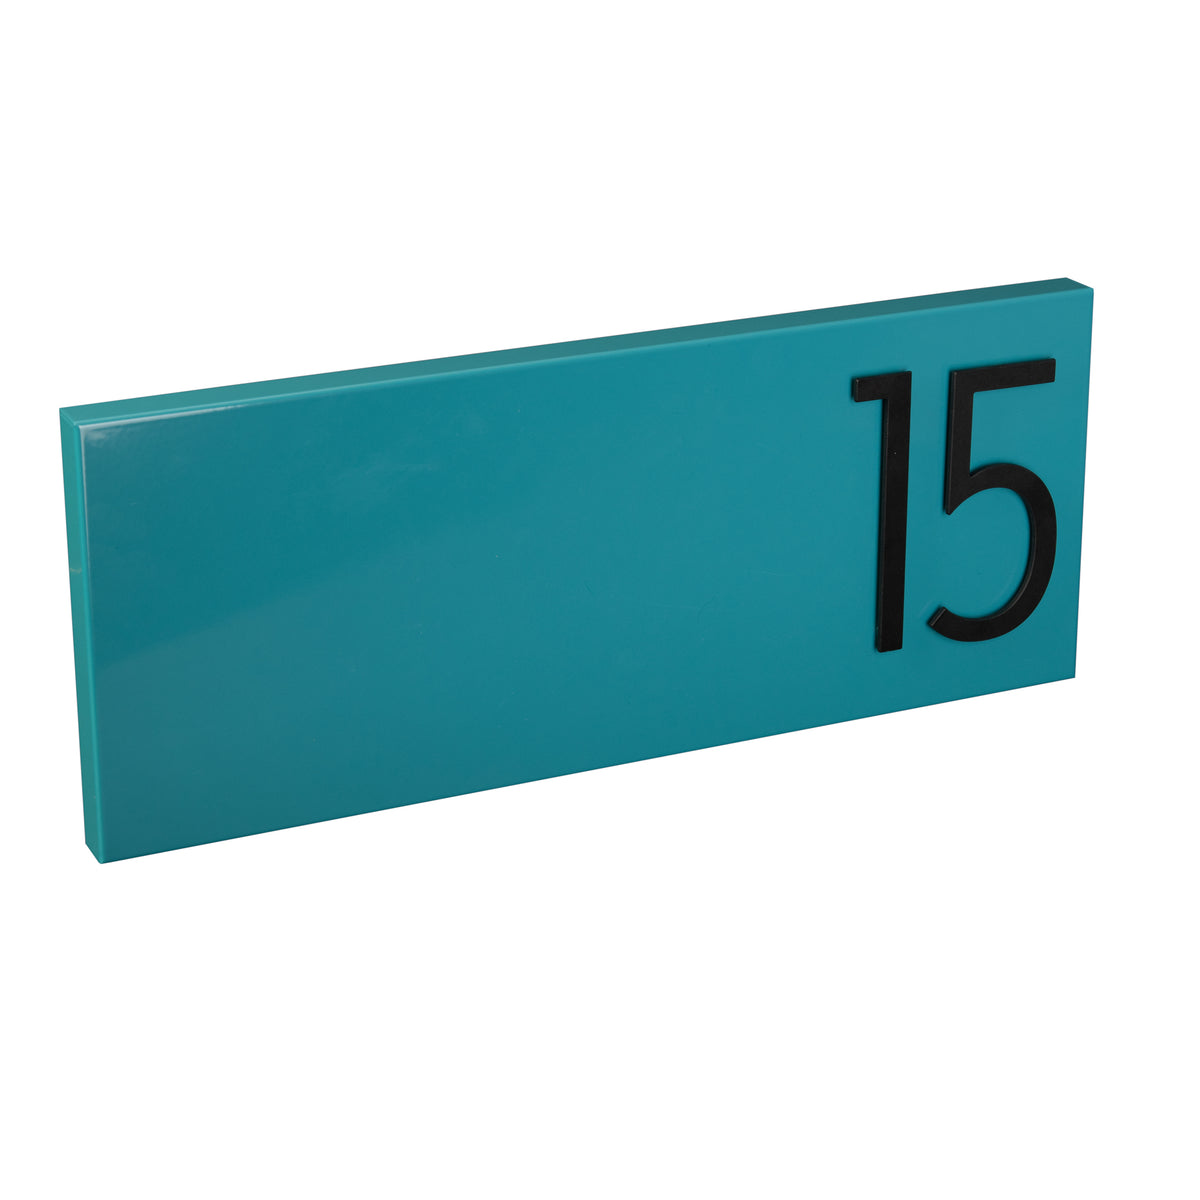 turquoise address plaque with black numbers right justified